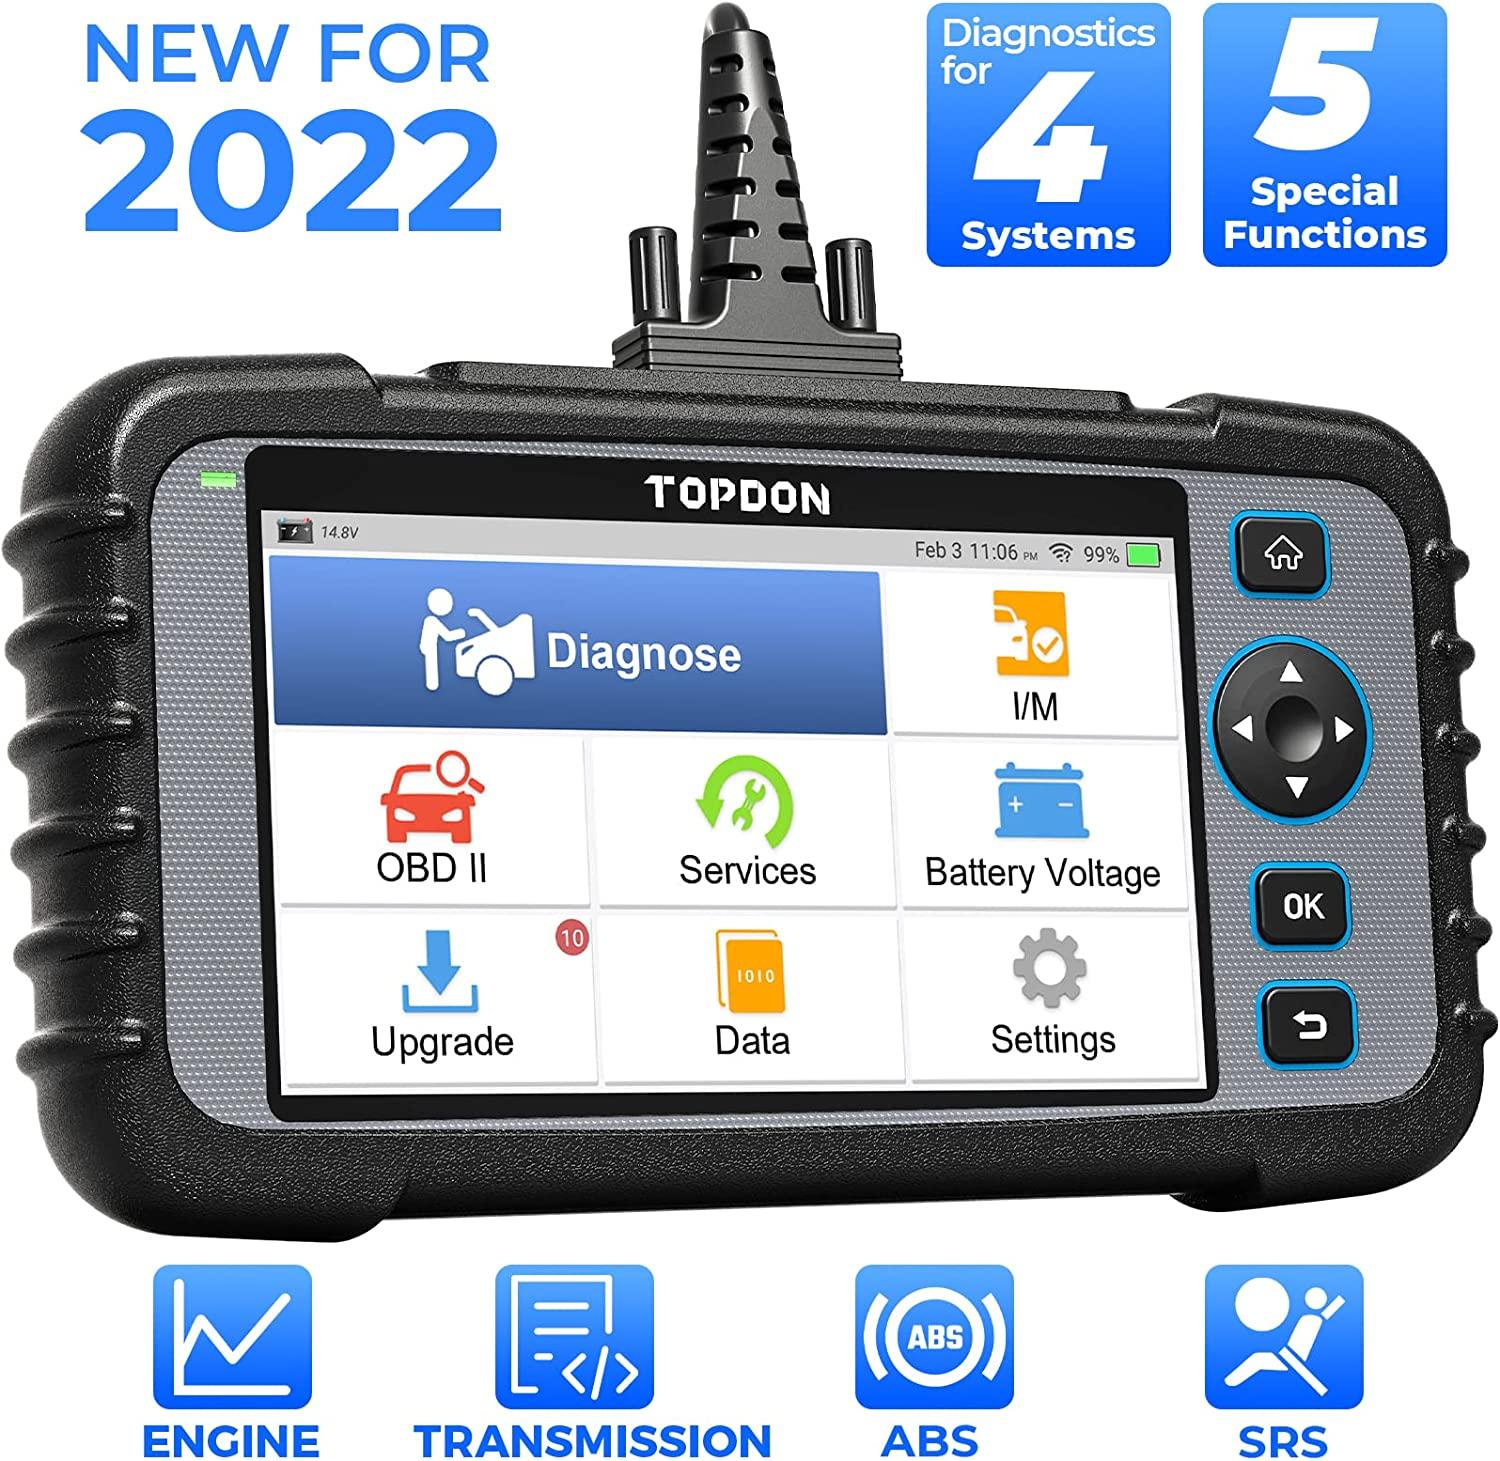 Topdon ArtiDiag600 OBD 2 Vehicle Diagnostic Scan Tool for $144.79 Shipped